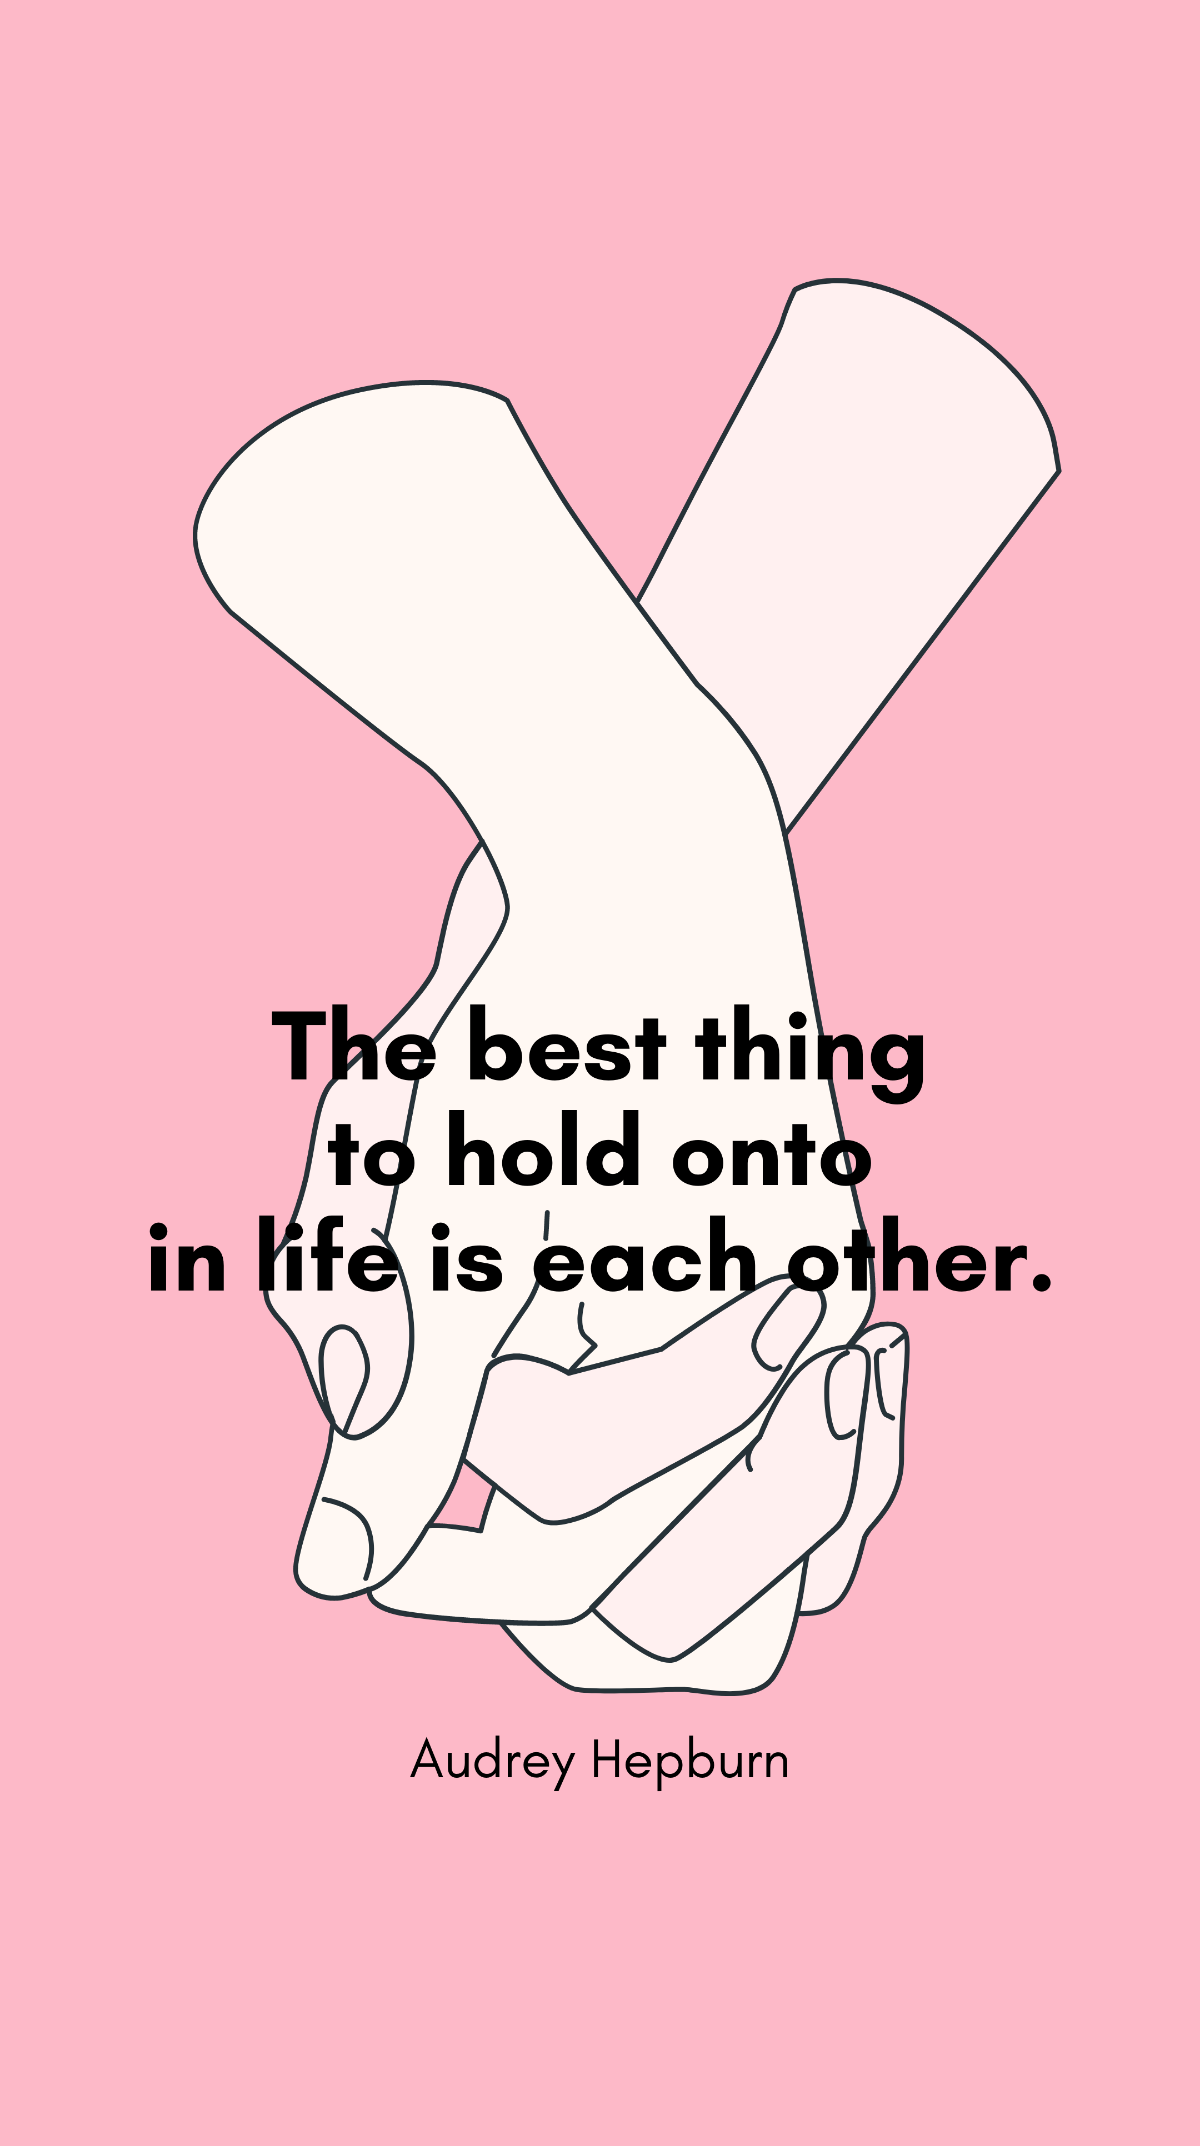 Audrey Hepburn - “The best thing to hold onto in life is each other.”  Template